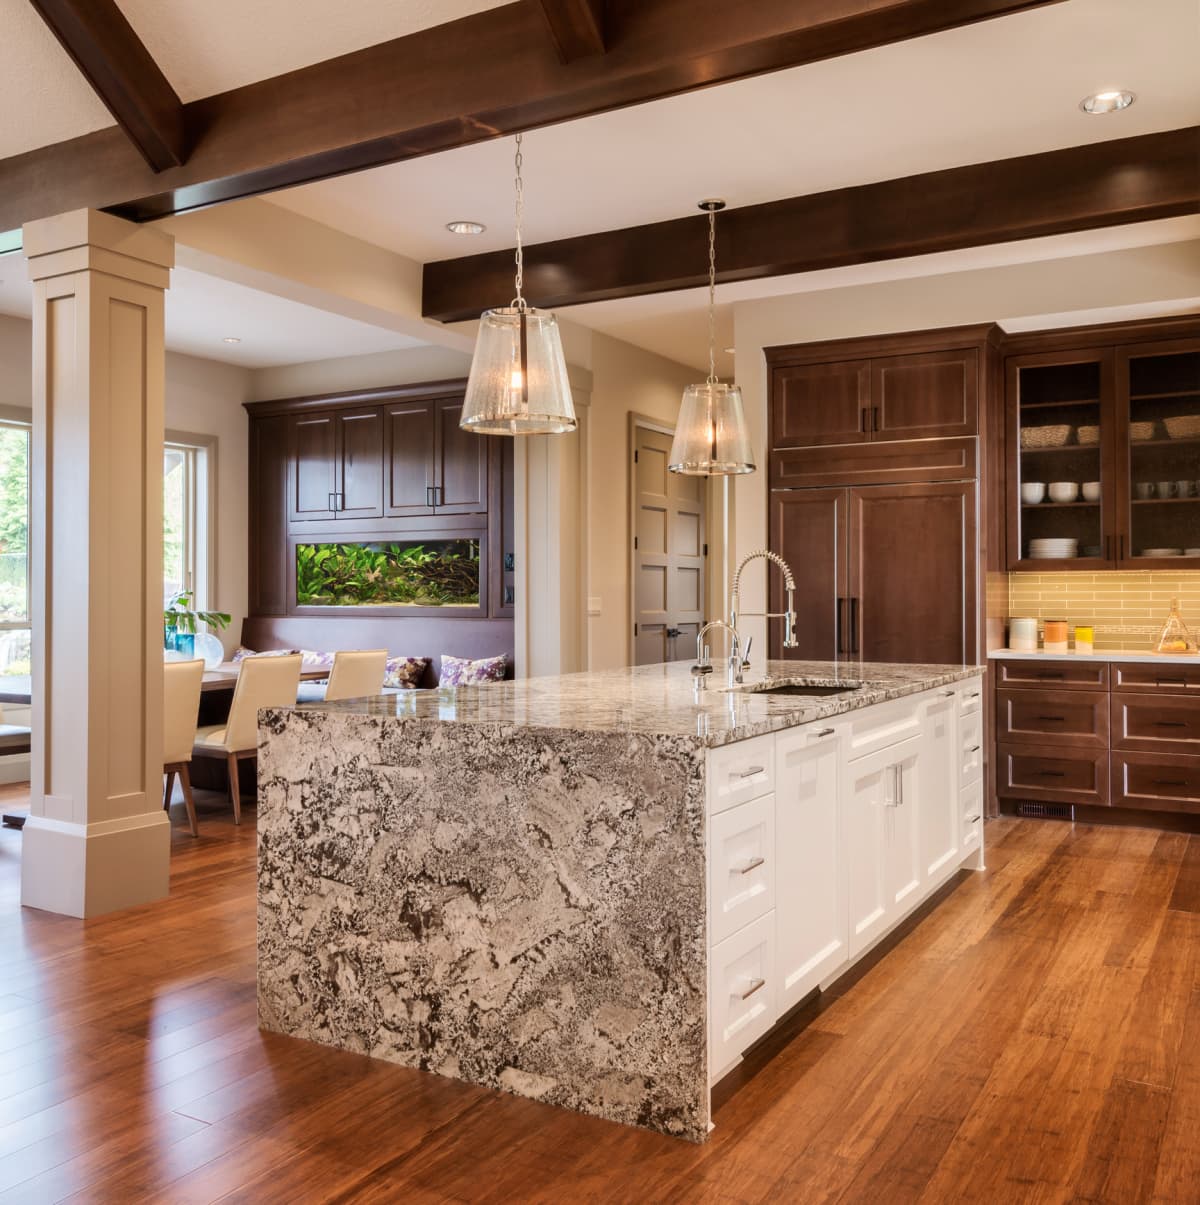 Kitchen with tall kitchen cabinet, countertop, island, and hardwood floor